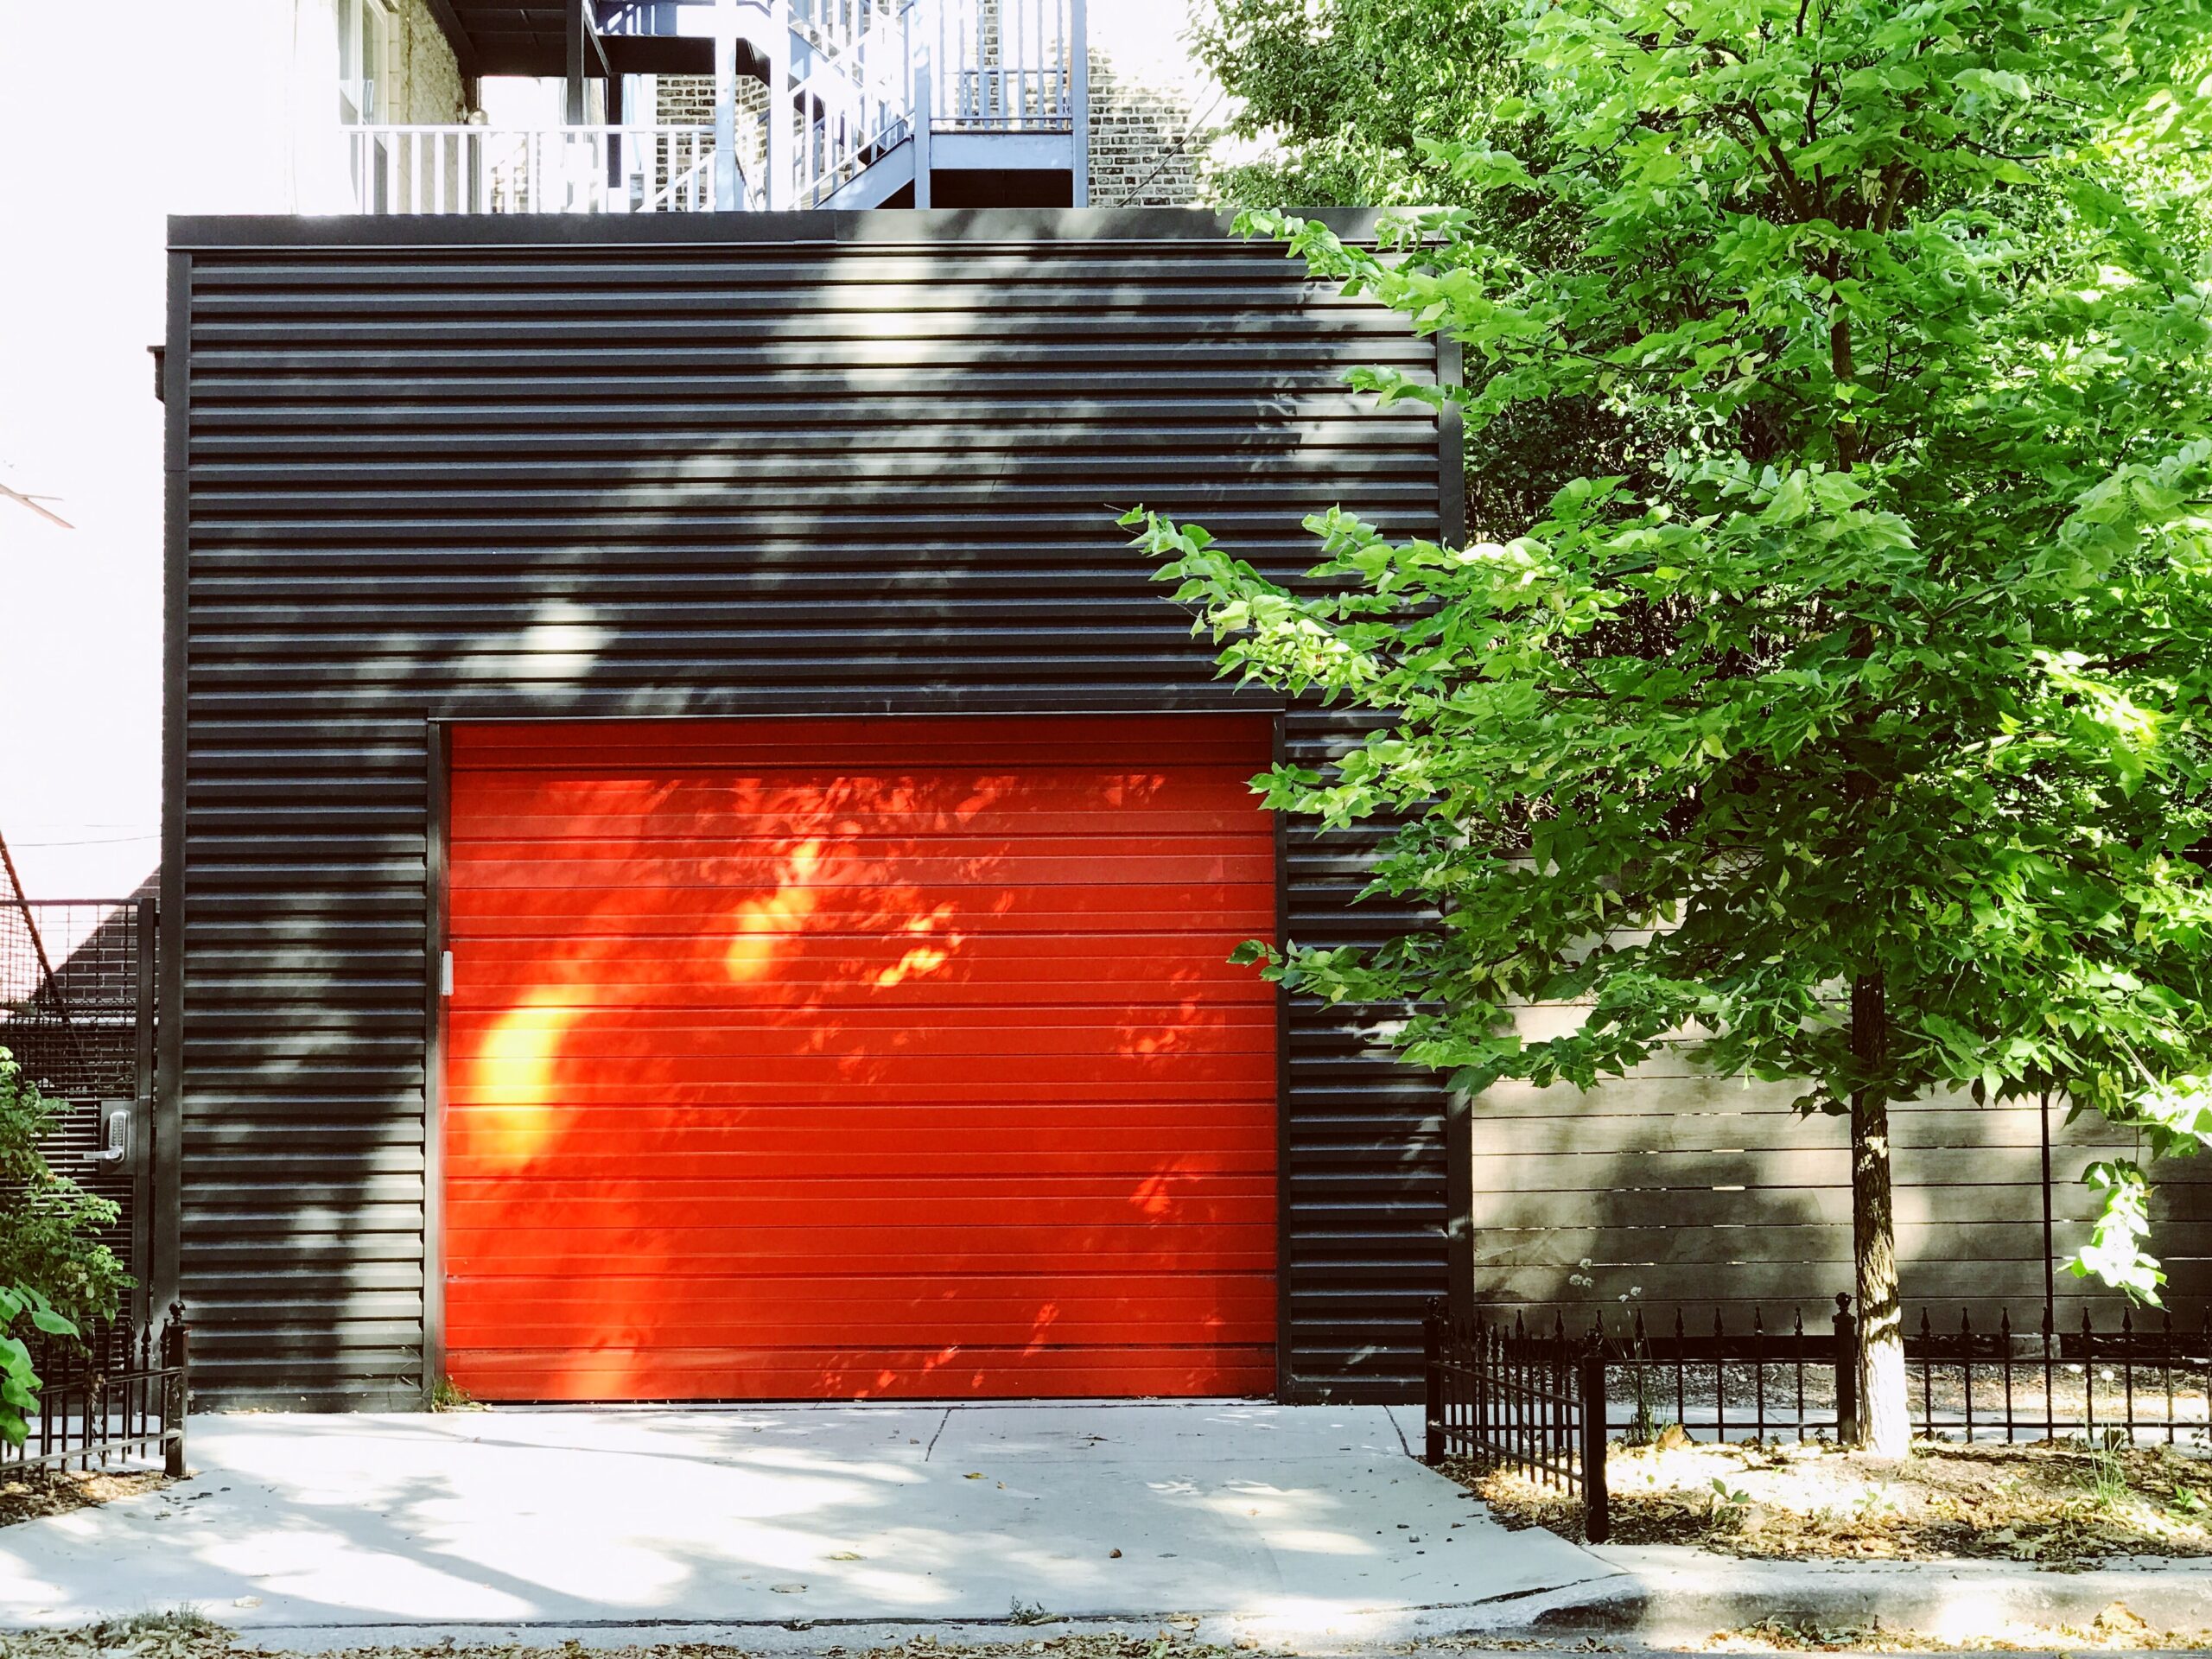 Things to Consider When Installing a Garage Door